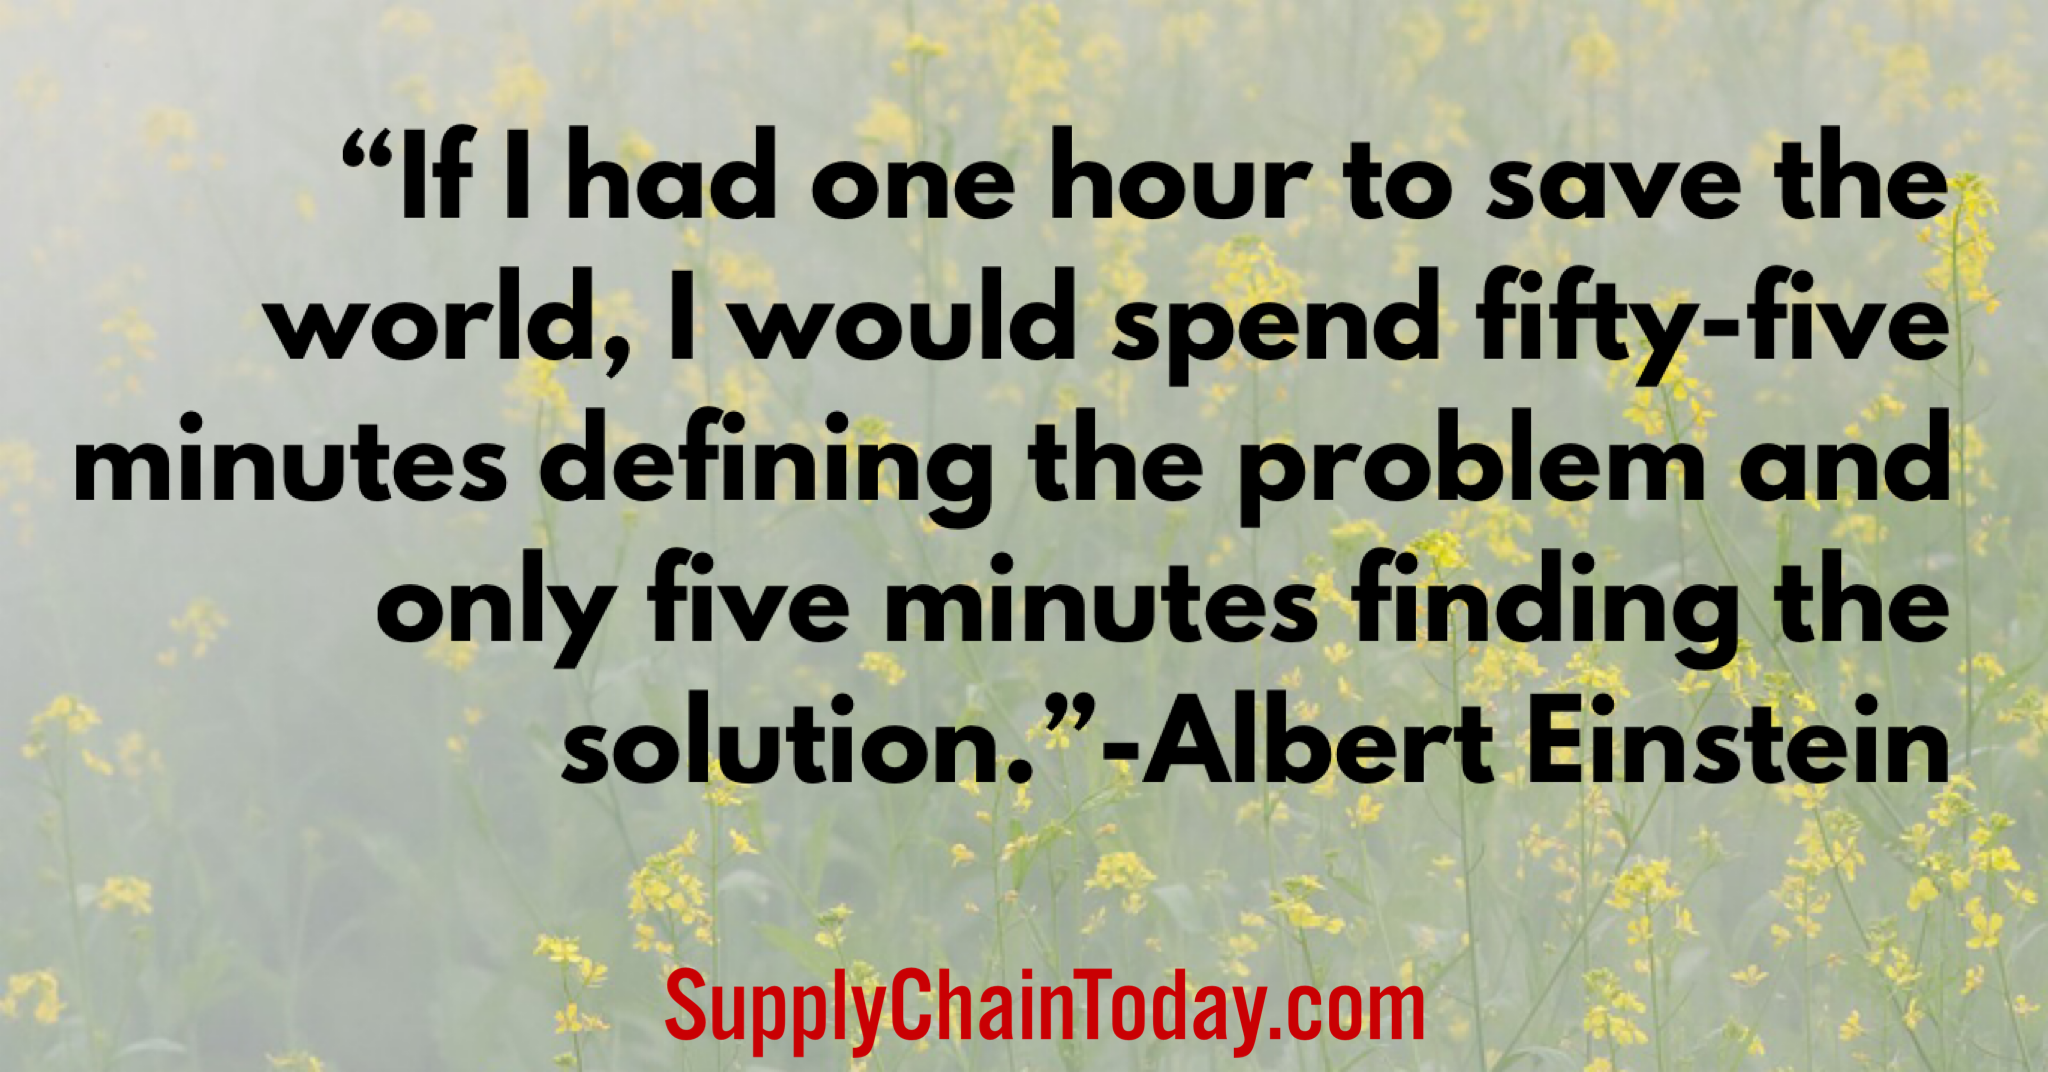 The Best Continuous Improvement Quotes - Supply Chain Today2048 x 1072